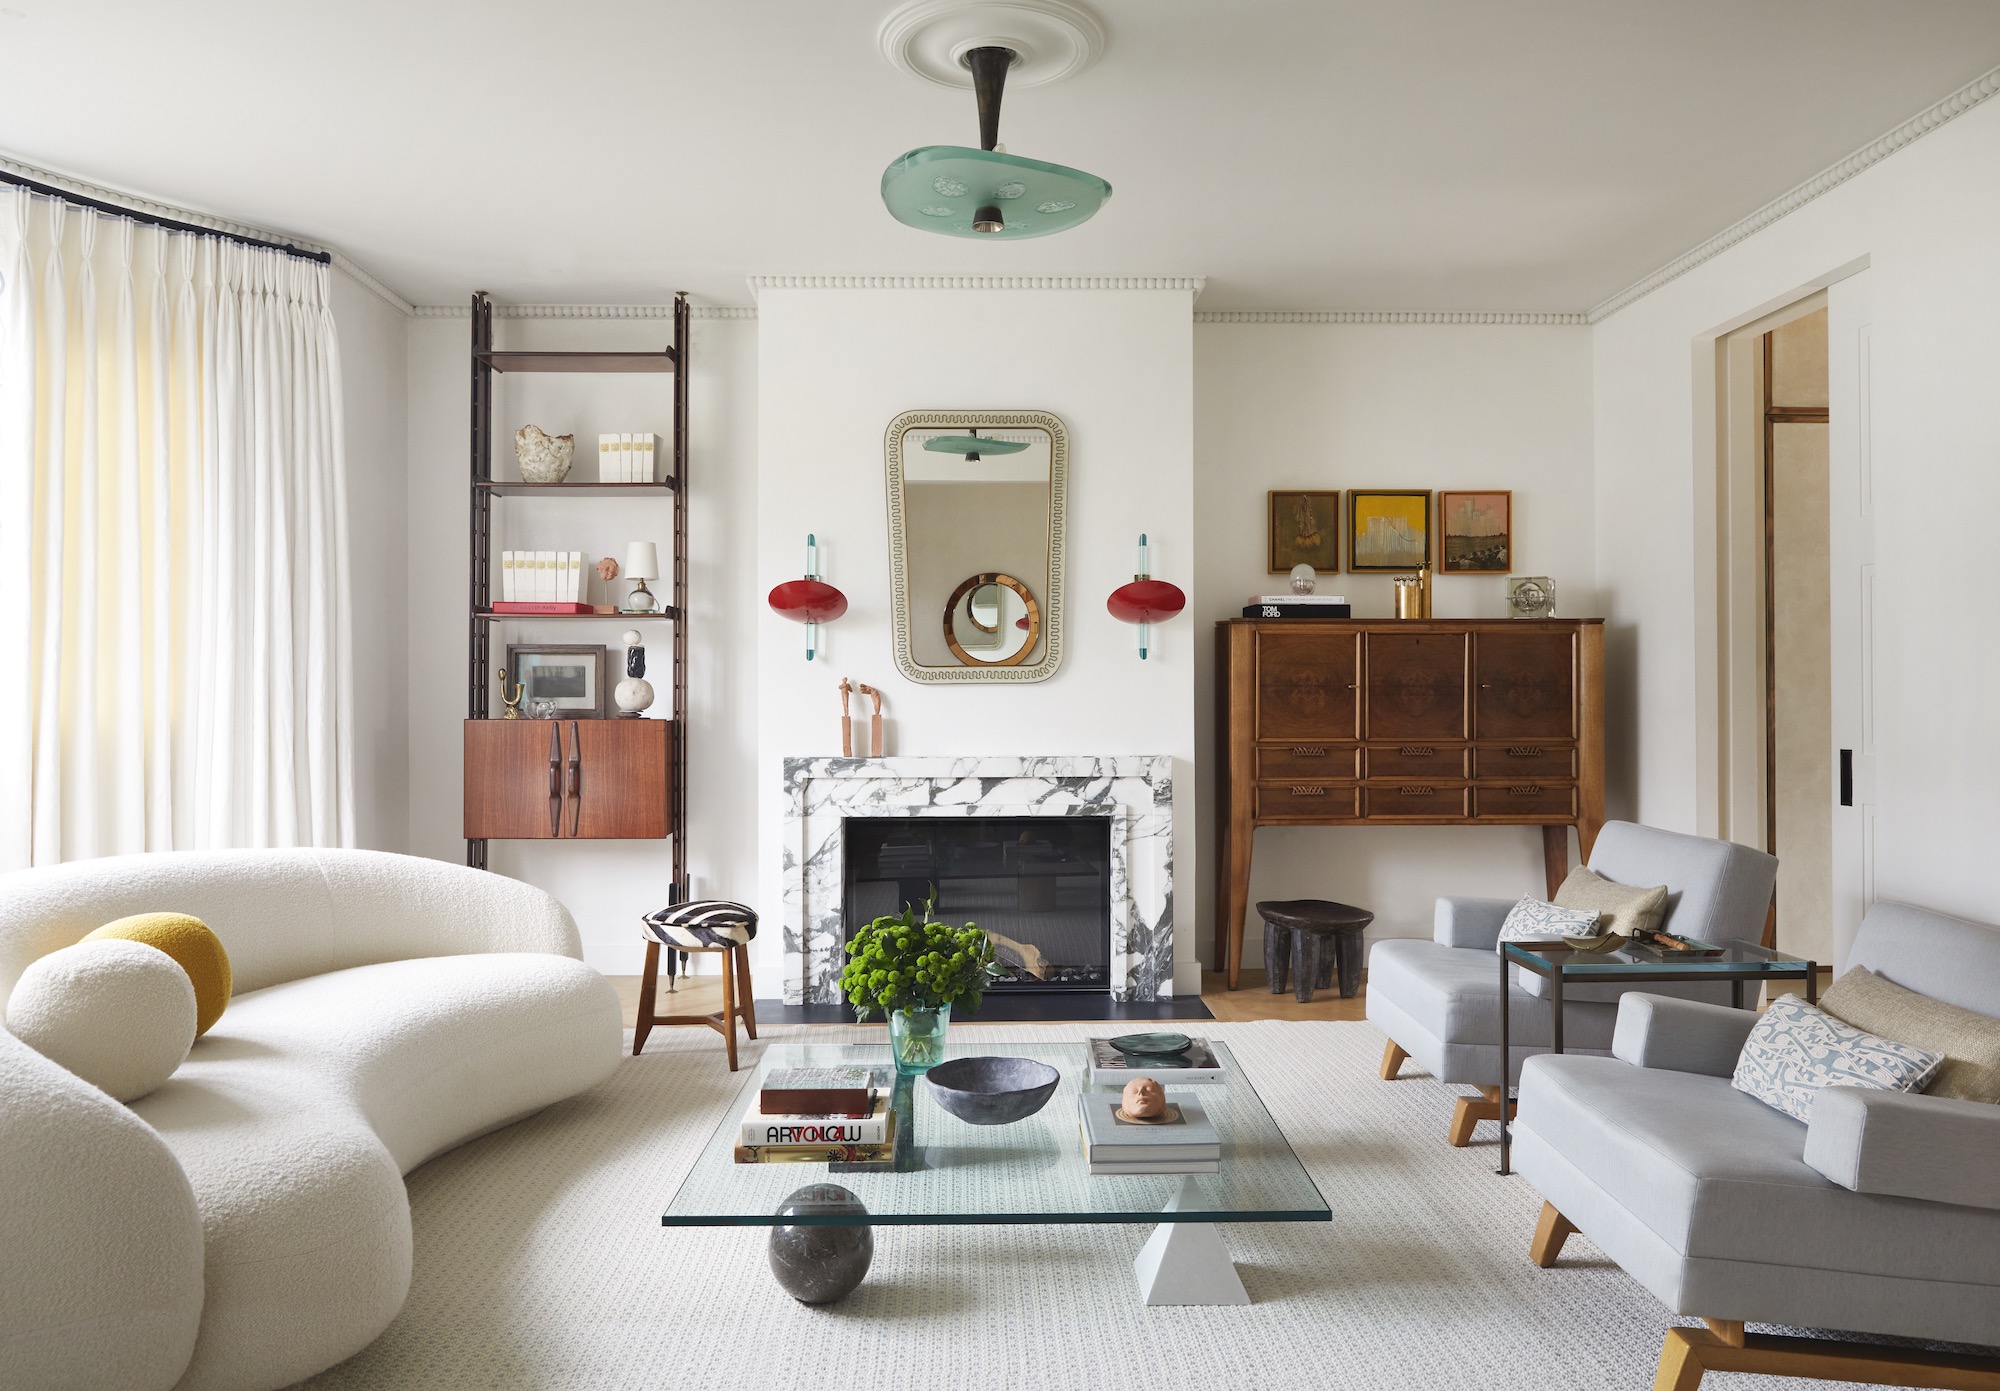 A residence interior designed by Bryan O'Sullivan in Old Church St (Photo: Helen Cathcart) in Effect Magazine